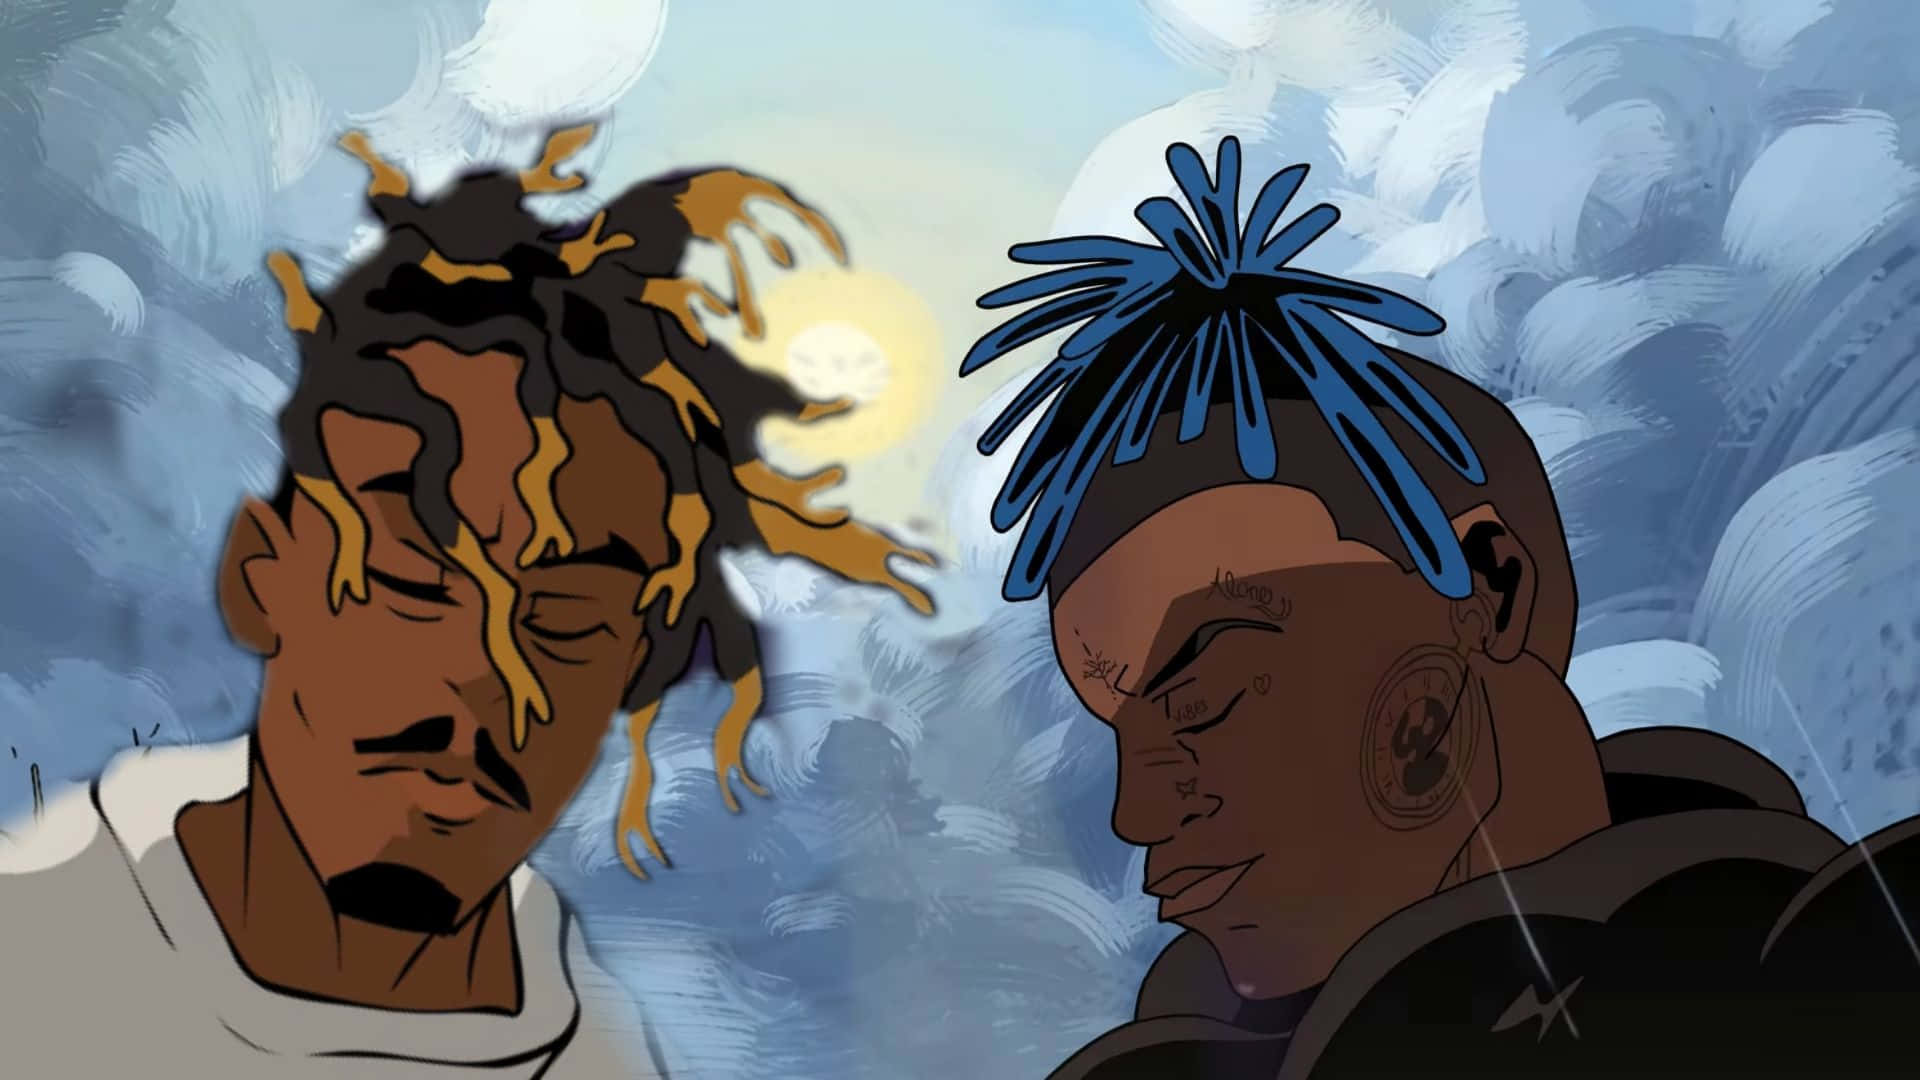 XXXTentacion and Juice Wrld, two of the biggest names in rap. Wallpaper